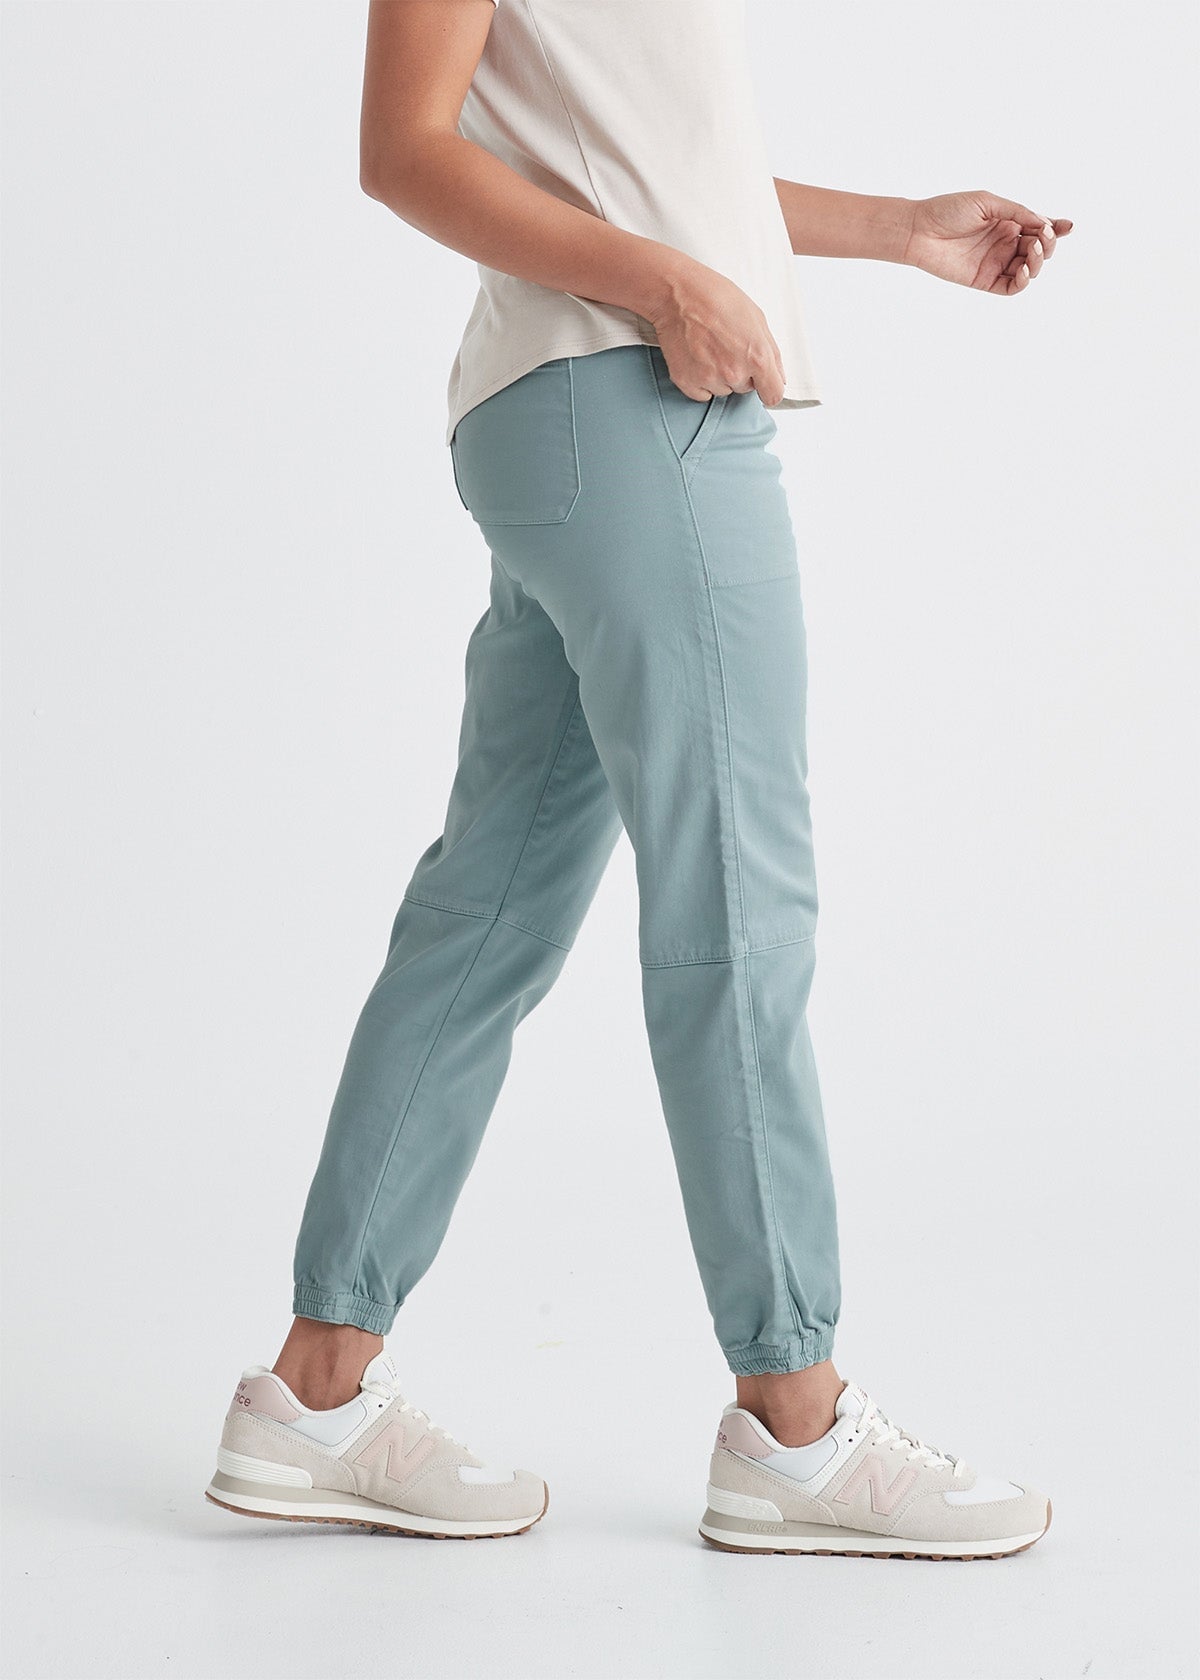 womens high rise light blue athletic jogger side